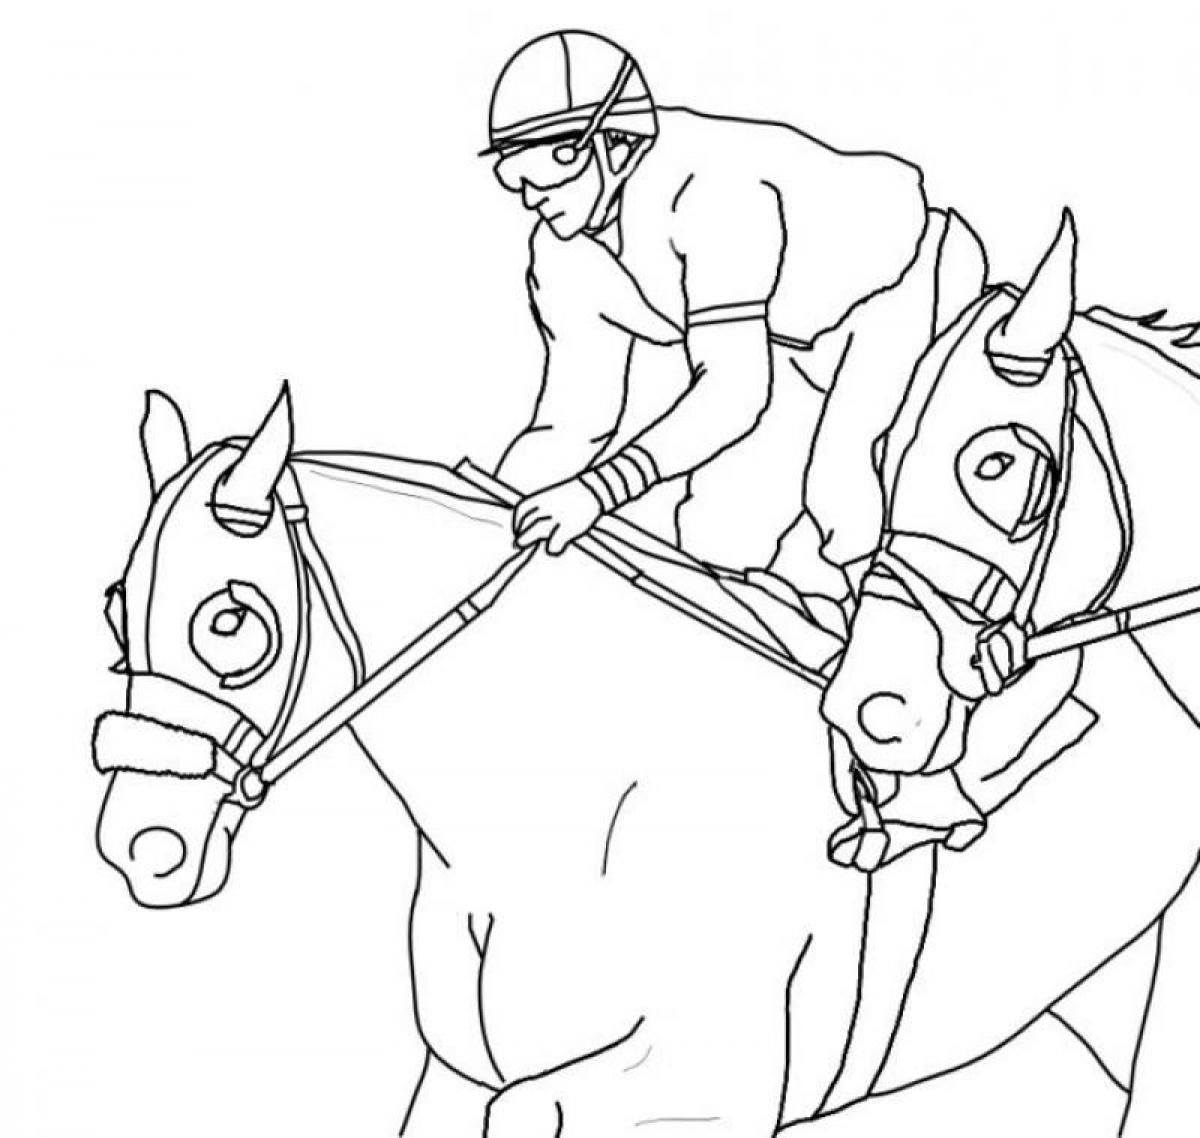 15 Pics of Barbie Coloring Pages Horse Racing - Barbie and Horse ...